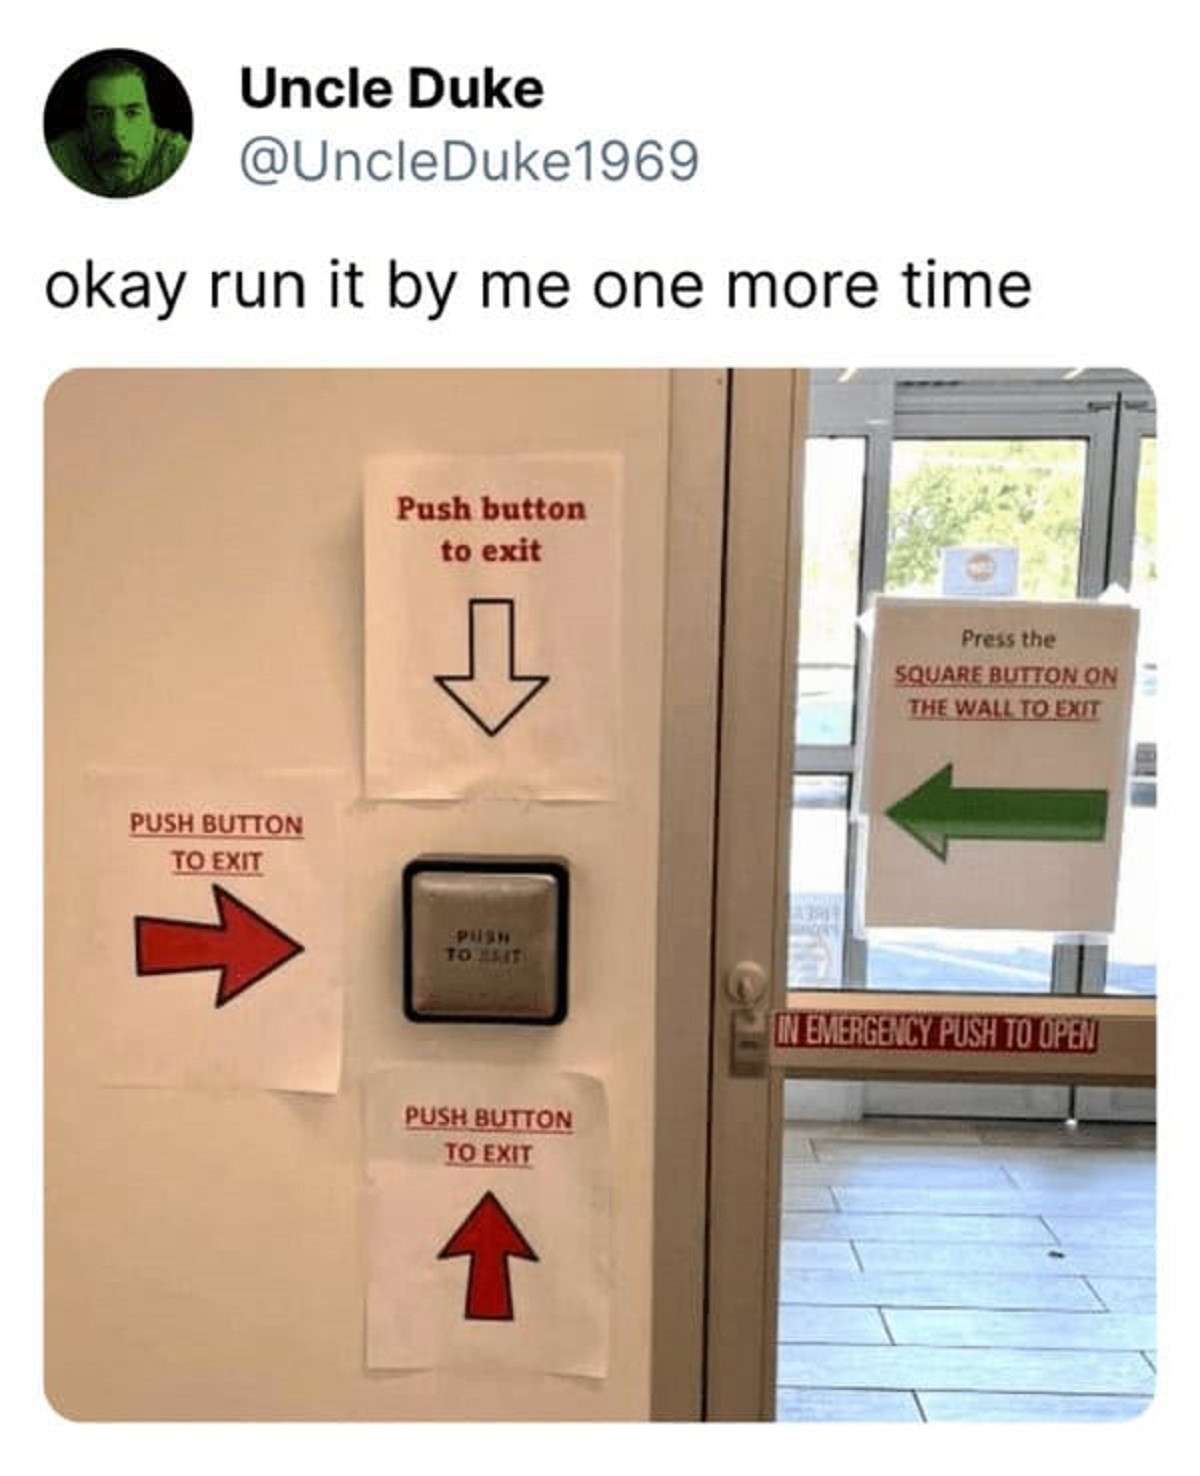 press button to exit sign - Uncle Duke okay run it by me one more time Push Button To Exit Push button to exit Press the Square Button On The Wall To Exit Push To Reit In Emergency Push To Open Push Button To Exit